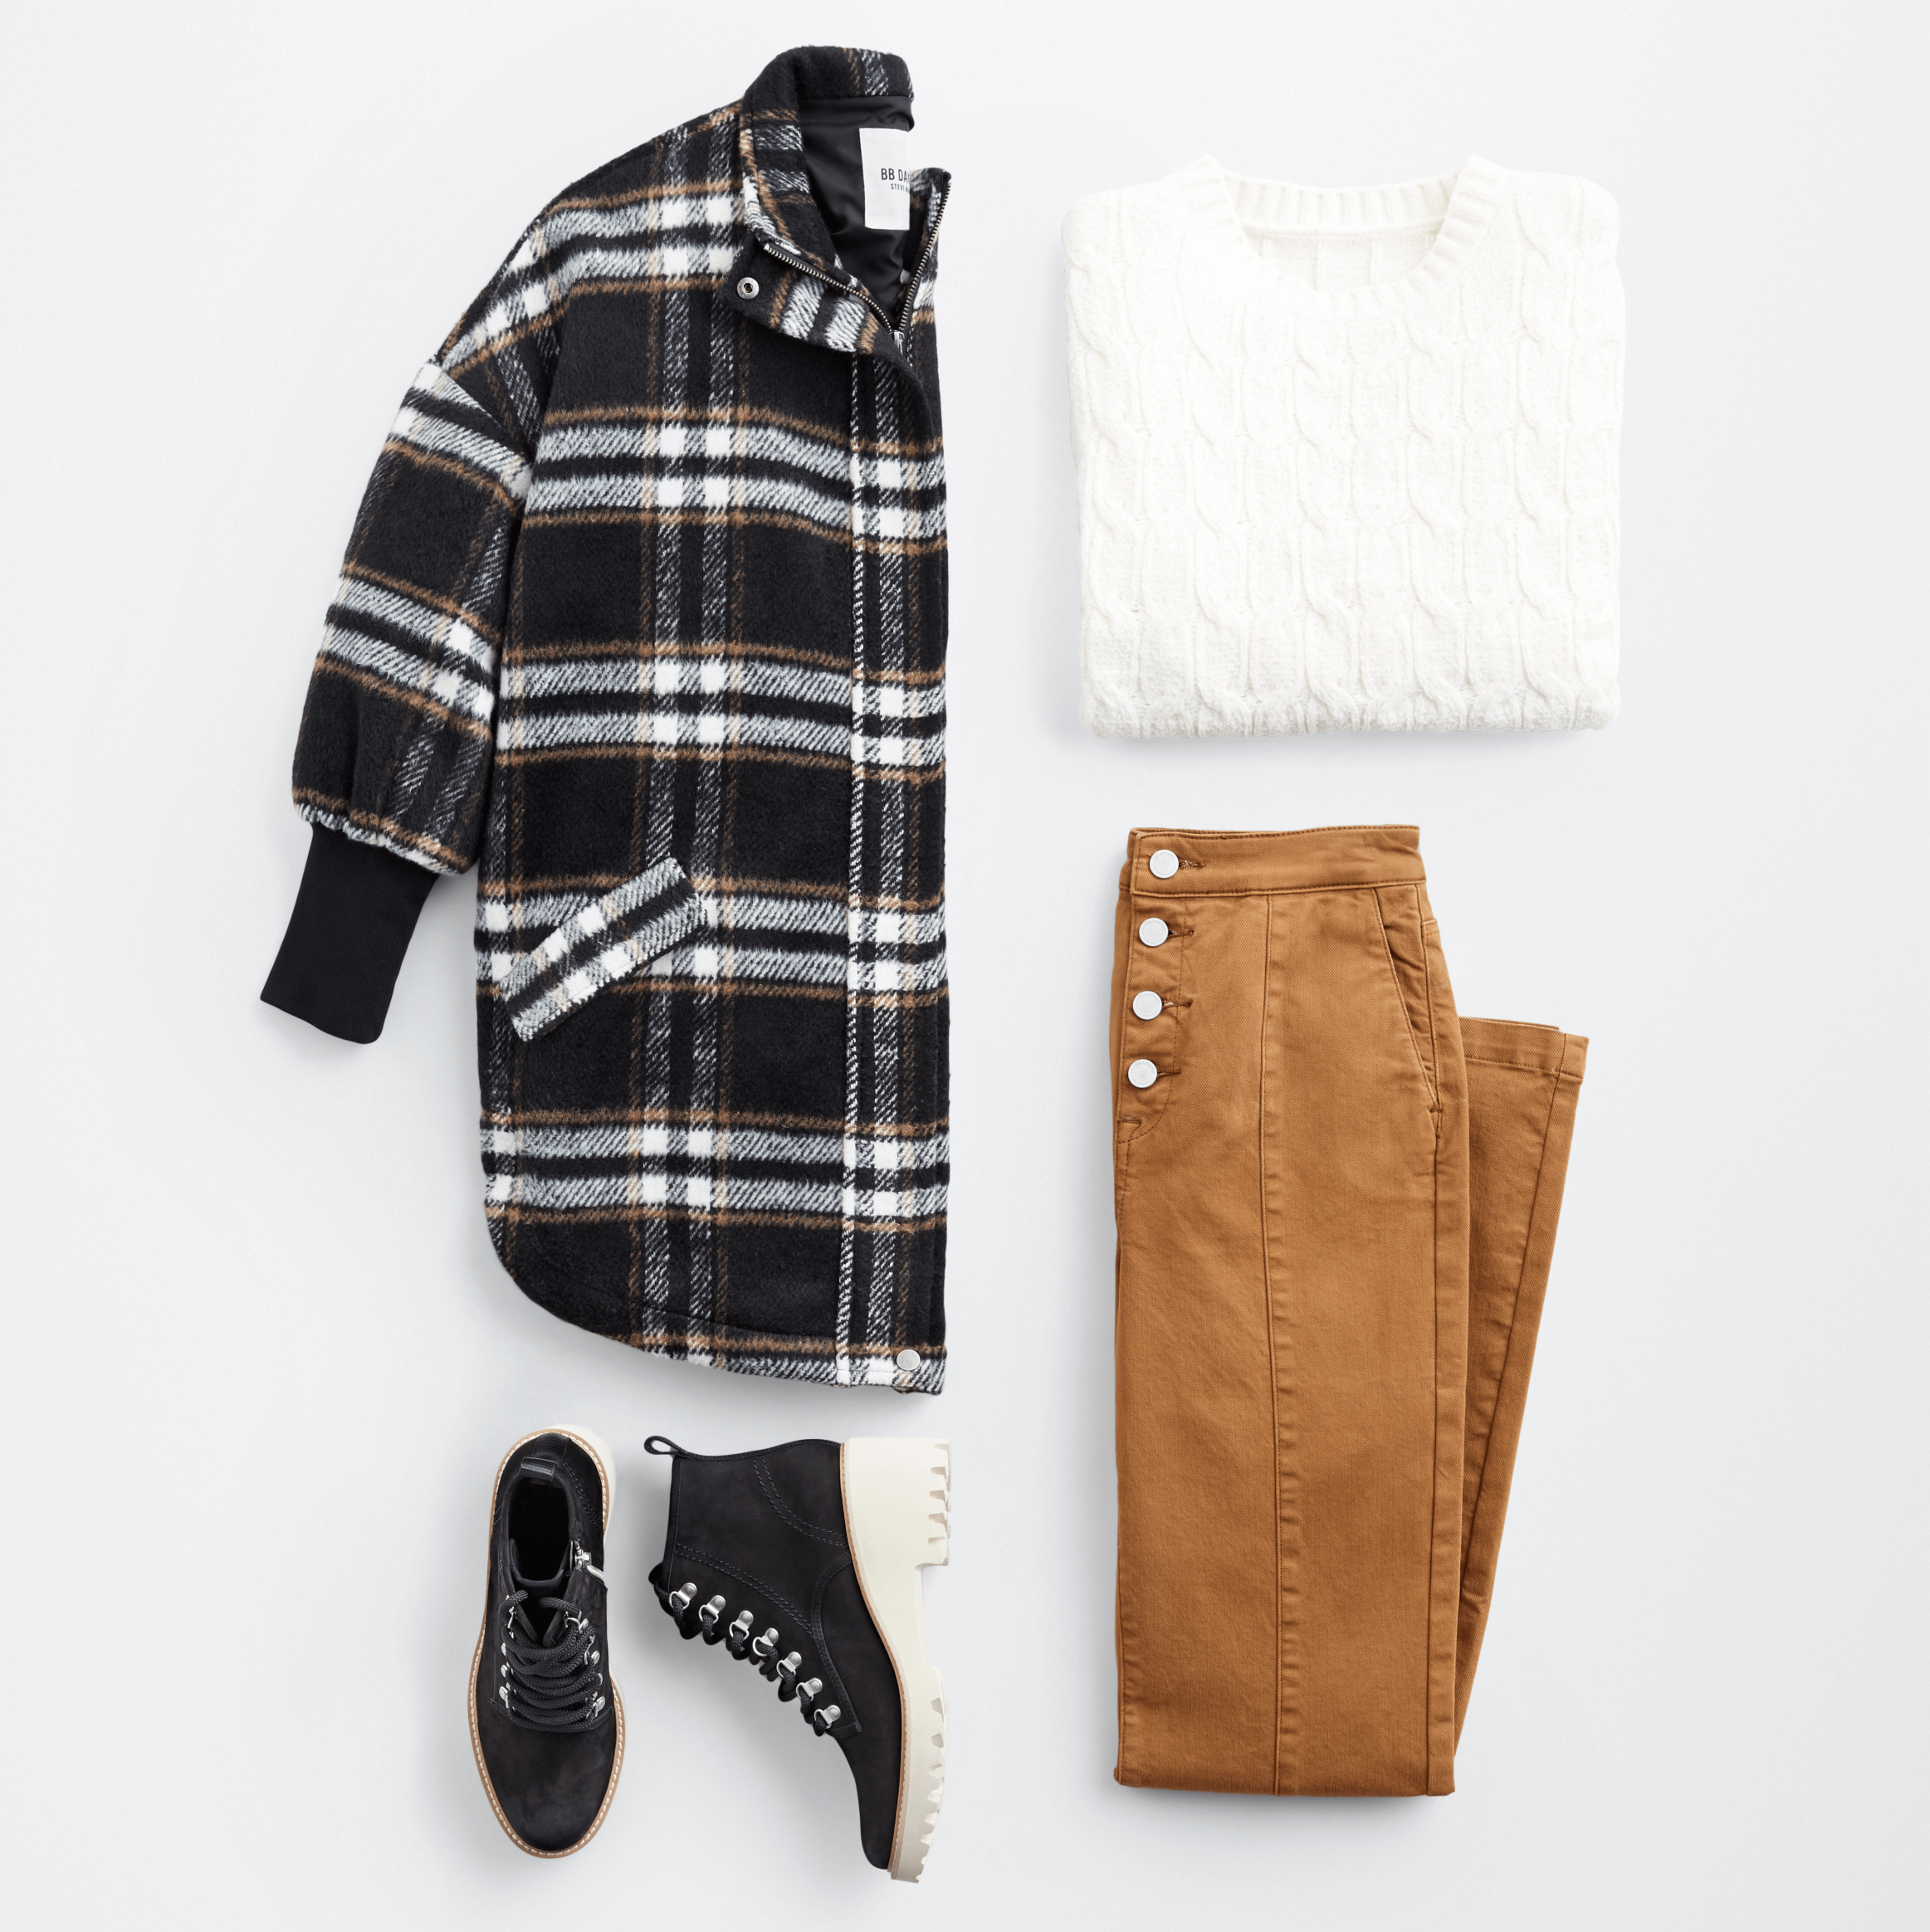 Fall Aesthetic Goals. Outfits and accessories  Edgy fall outfits,  Aesthetic clothes, Clothes